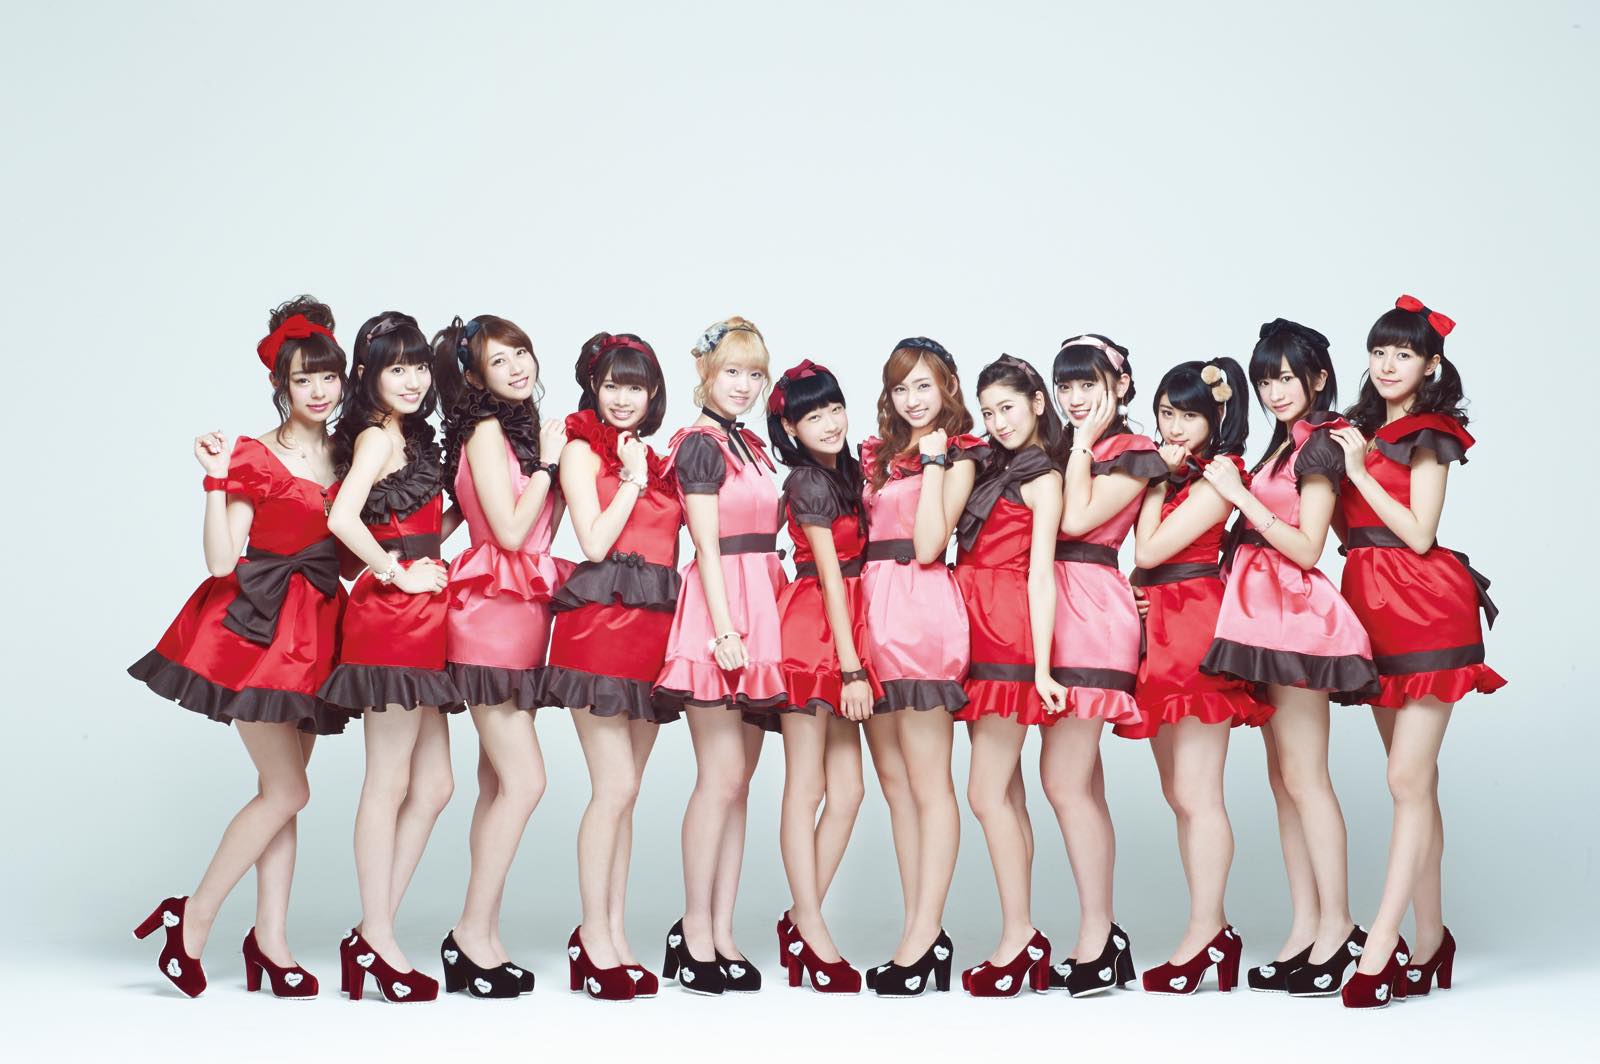 Valentine’s Day is Coming and Doll☆NEO Gives out Chocolate in the MV for “Chocolat☆Romantic”